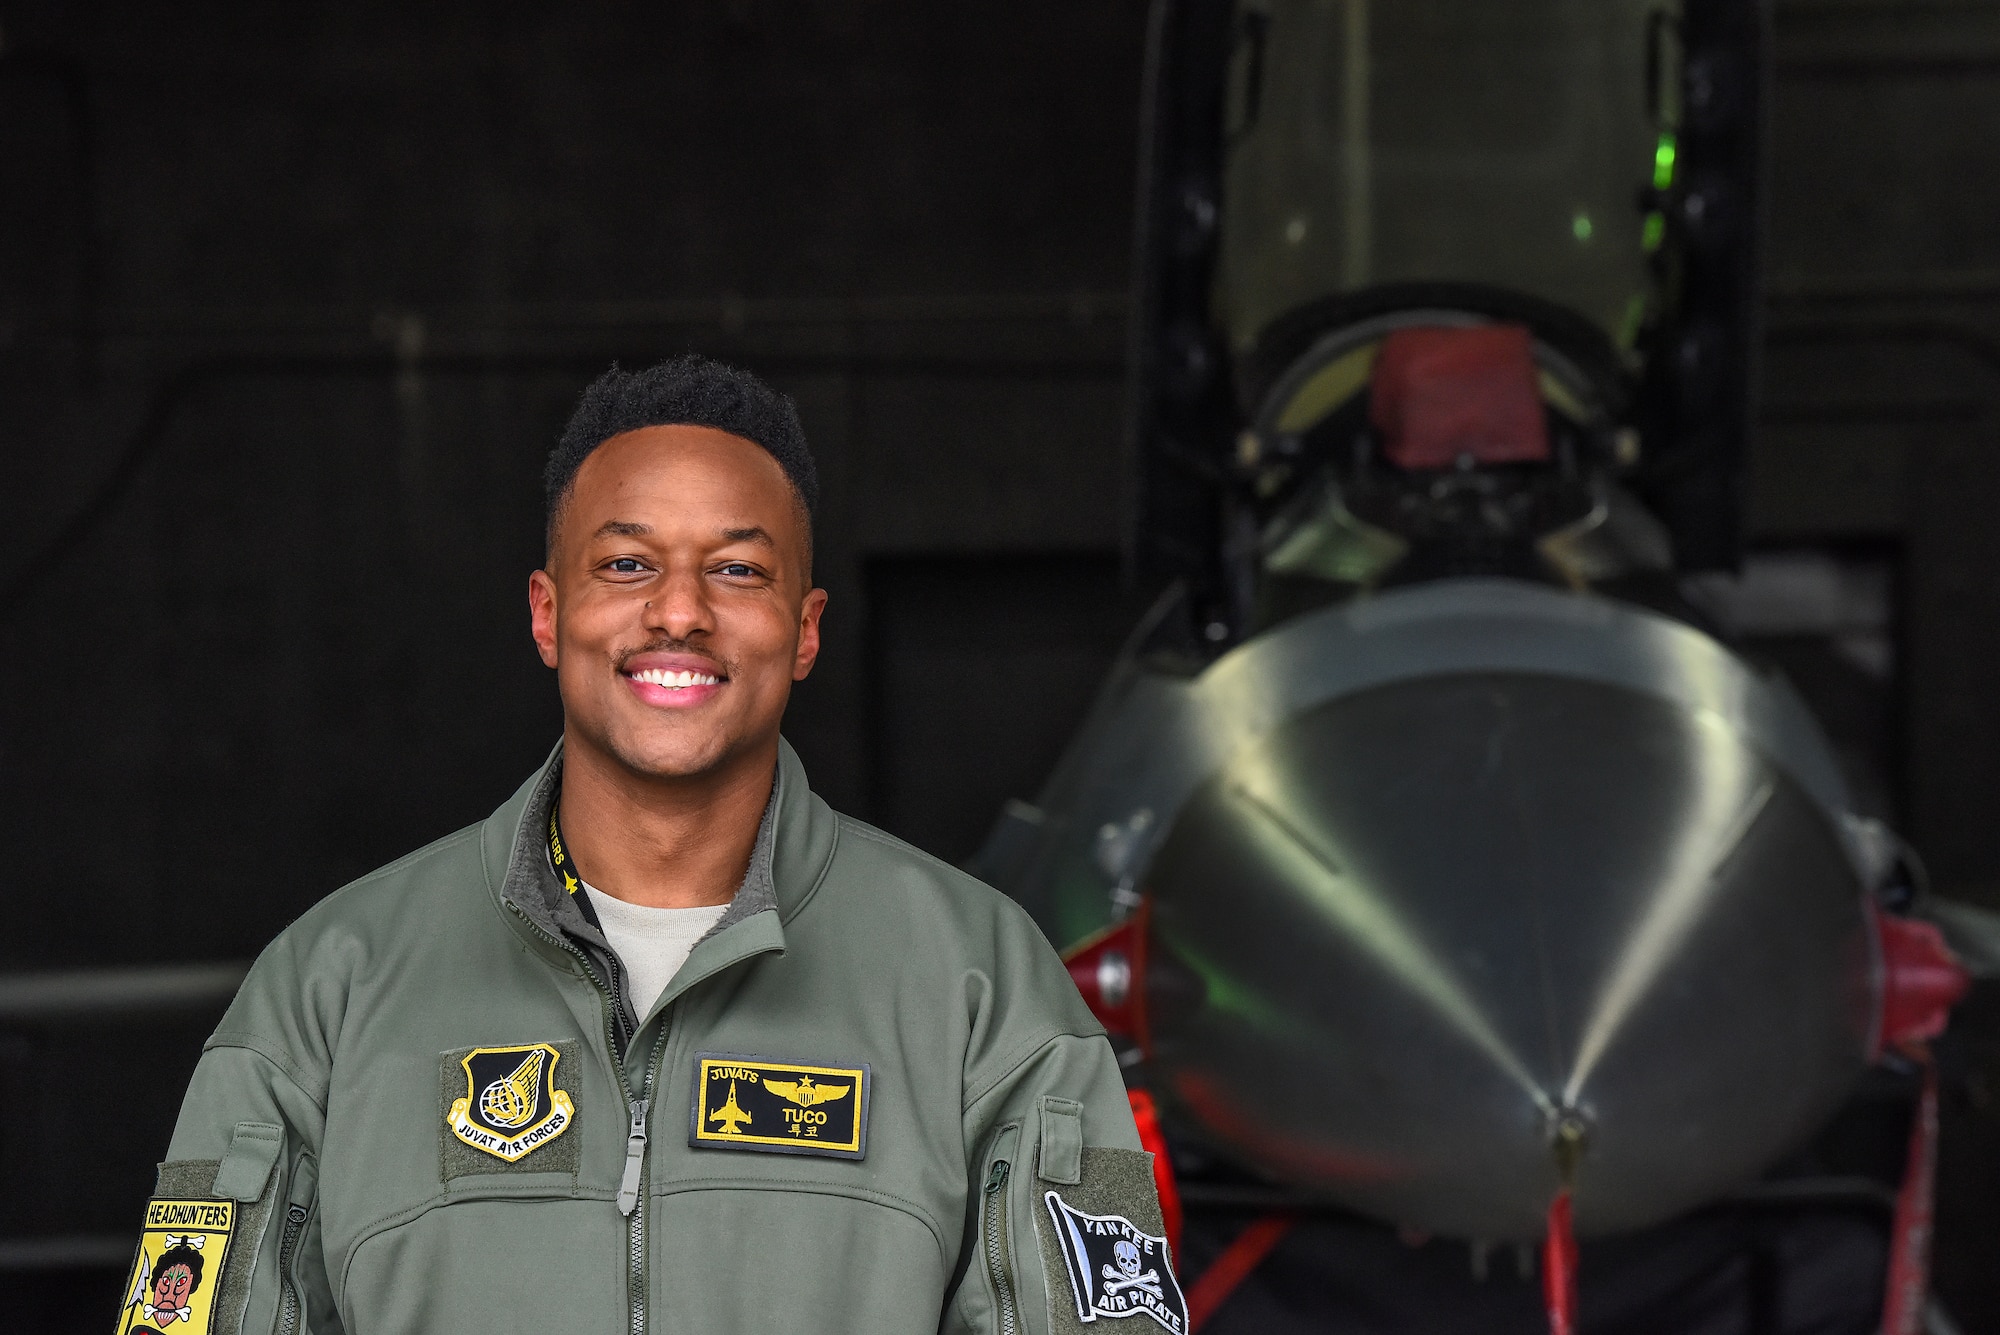 Maj. Chris "Tuco" Harrison, 80th Fighter Squadron assitant director of operations and chief of standards and evaluations, poses for a photo in front of an F-16 Fighting Falcon on the flightline at Kunsan Air Base, Republic of Korea, Feb. 18, 2021. Harrison commissioned out of Tuskegee University ROTC detachment back in 2011 and follwoed his dream to become a pilot in the U.S. Air Force. (U.S. Air Force photo by Senior Airman Suzie Plotnikov)